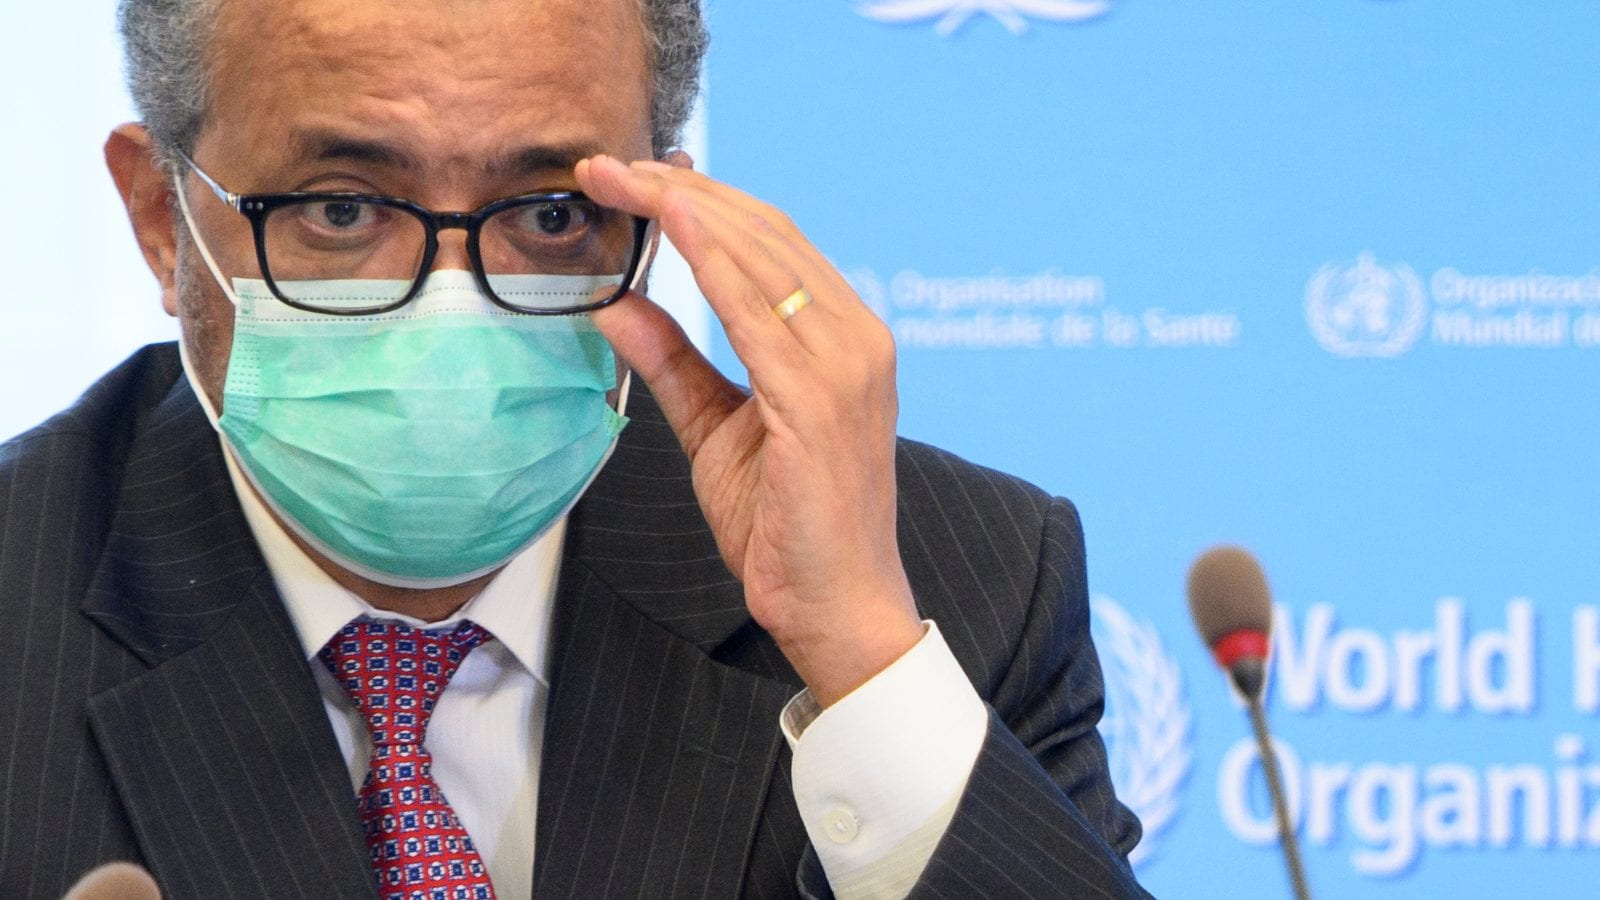 Covid-19 Pandemic is ‘Nowhere Near Over’, Says WHO Chief Ghebreyesus